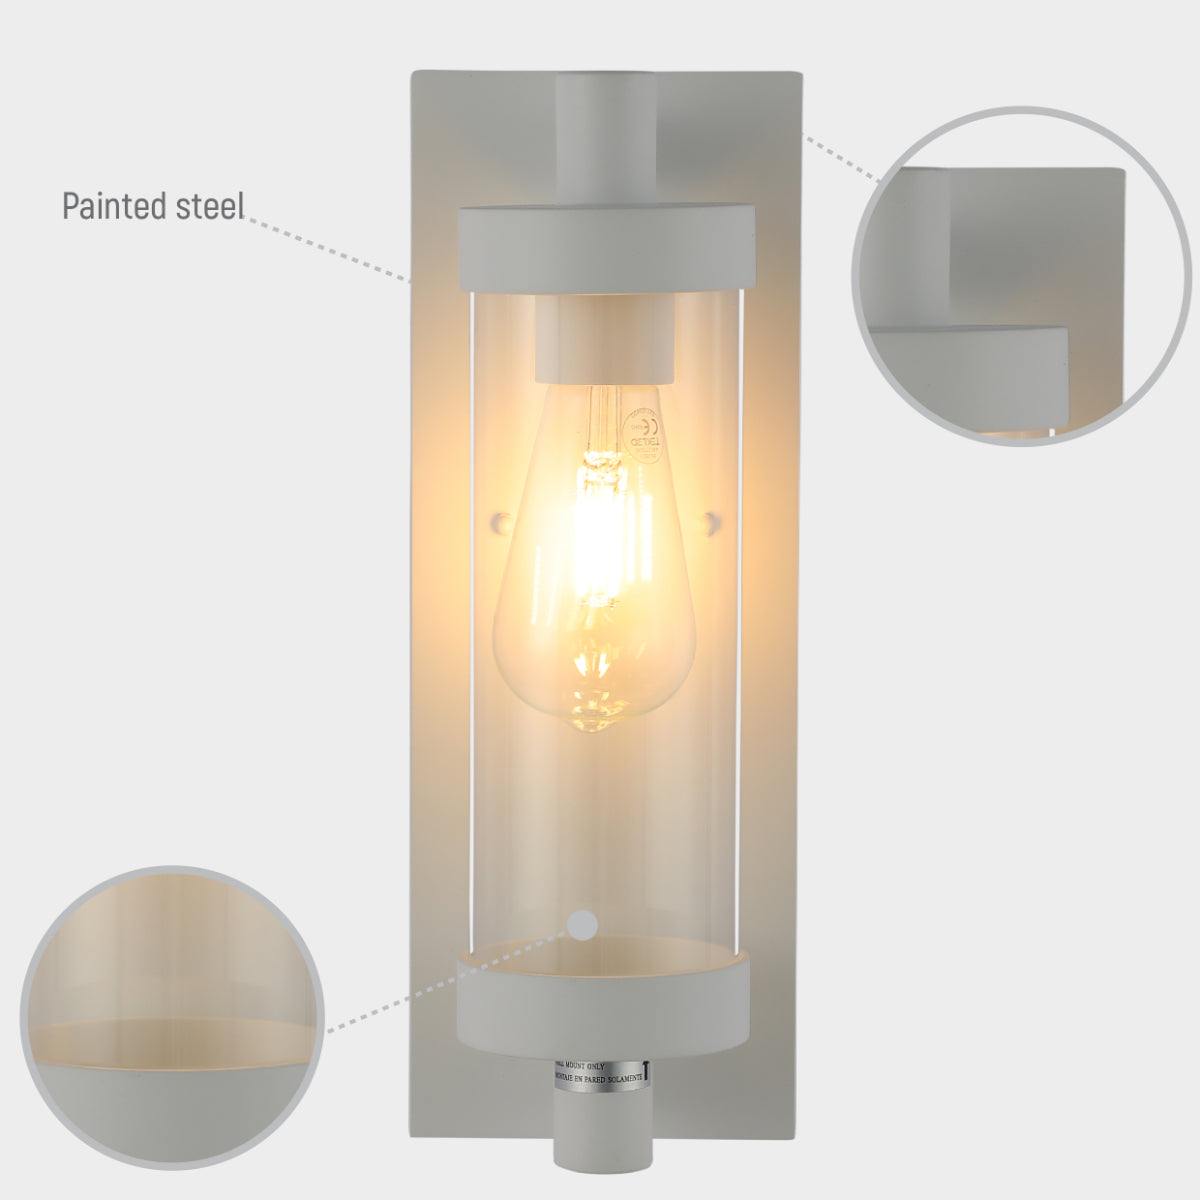 Lighting properties of Timeless Elegance Wall Sconce - Durable Glass & Aluminum, E27 Compatible Outdoor/Indoor Light 182-03414